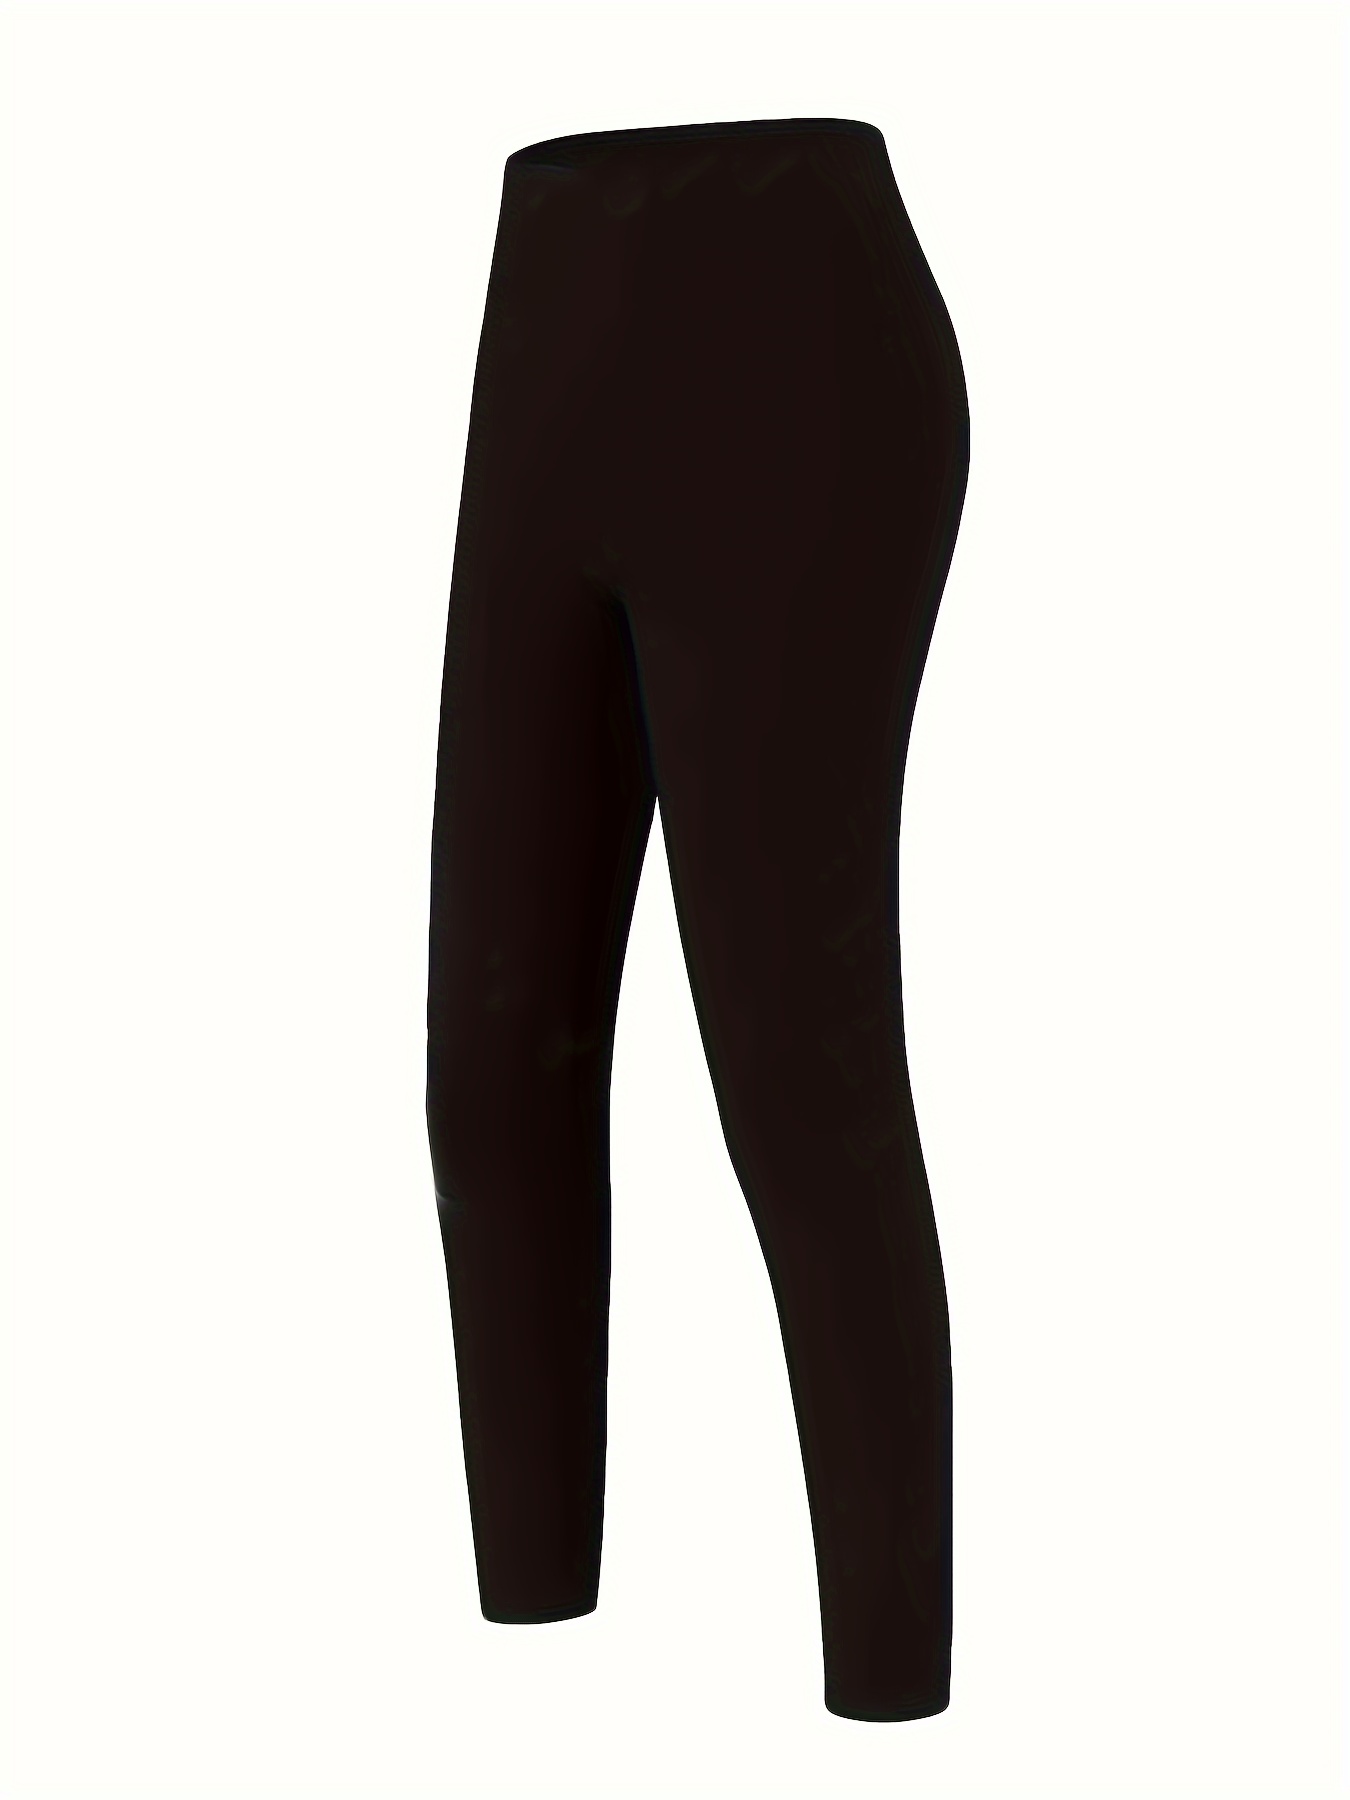 Plus Size Basic Leggings, Women's Plus Solid Wide Waistband High * Stretchy  Slim Fit Leggings